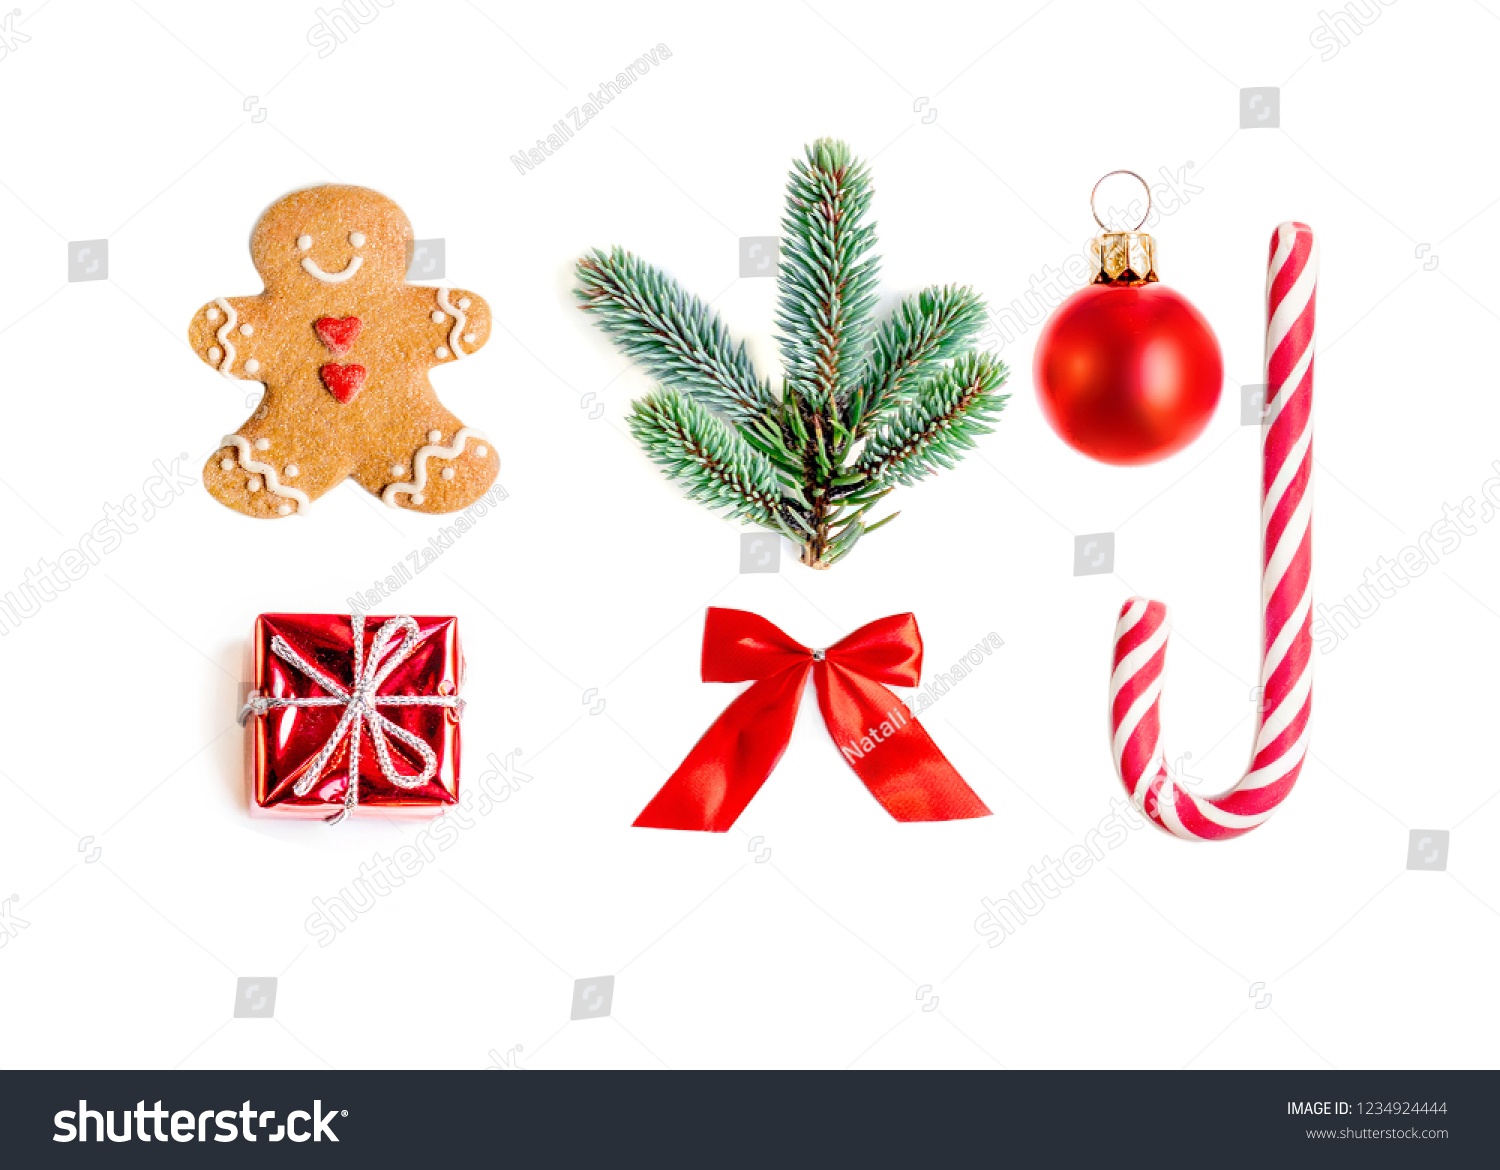 Christmas collection with gifts, fir tree, gingerbread man cookie and  ornaments isolated on white background close up. Flat lay, top view
 #1234924444